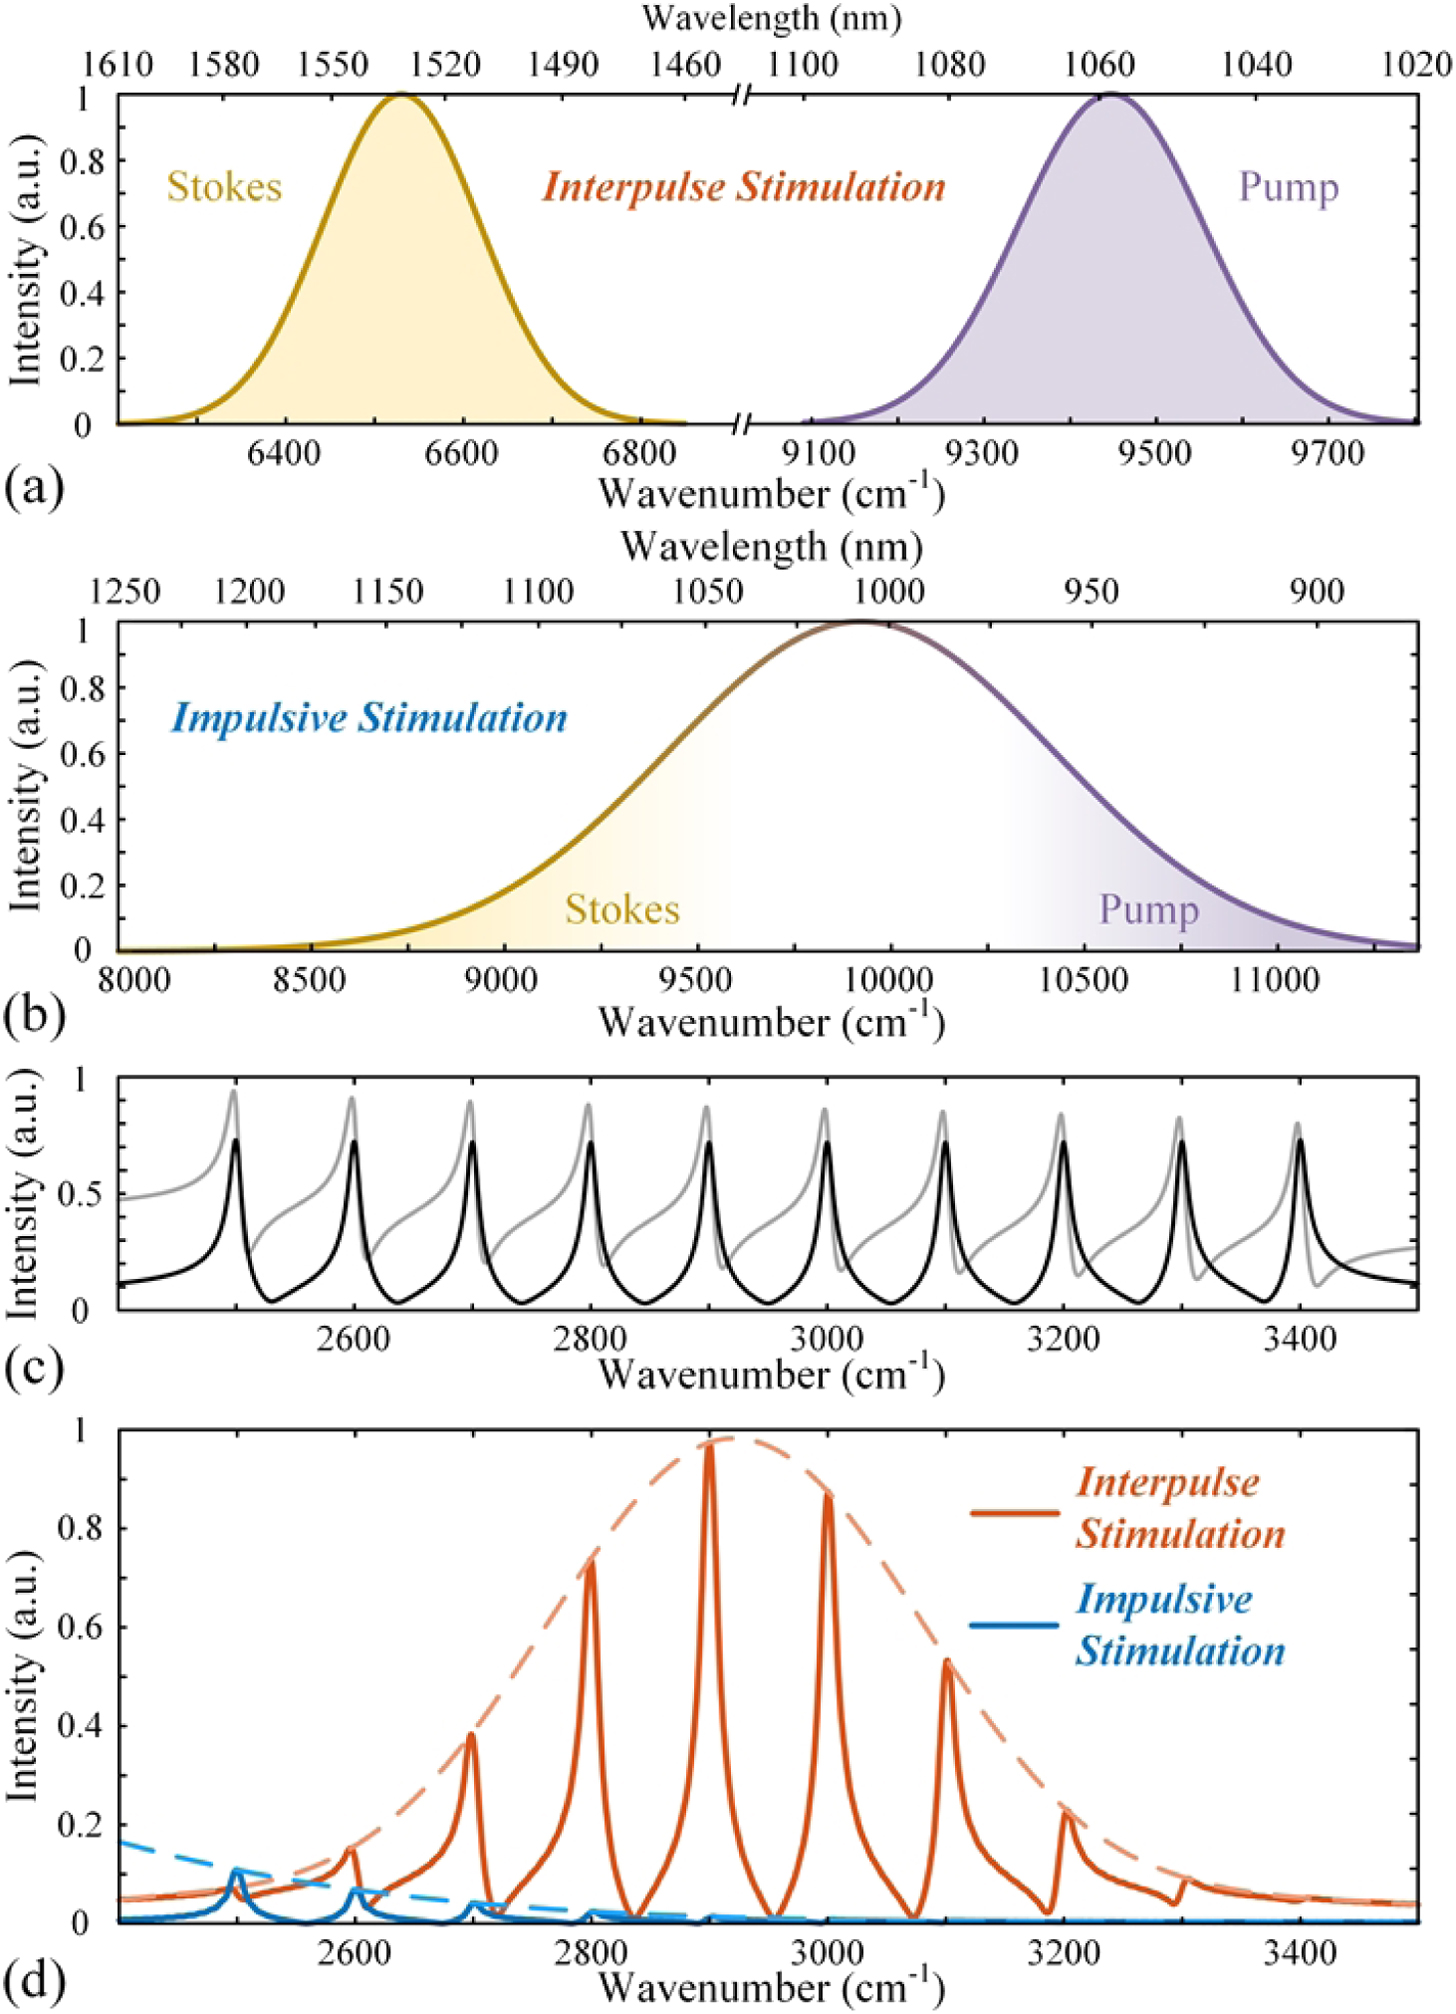 Simulated comparison of the spectral coverage of interpulse stimulation FT-CARS and impulsive stimulation FT-CARS. (a) Excitation spectrum of the interpulse stimulation scheme. (b) Excitation spectrum of the impulsive stimulation scheme. (c) Assumed spectrum without (dark black) and with (light gray) nonresonant background of the simulated sample. (d) Retrieved spectra of the interpulse and impulsive stimulation FT-CARS.